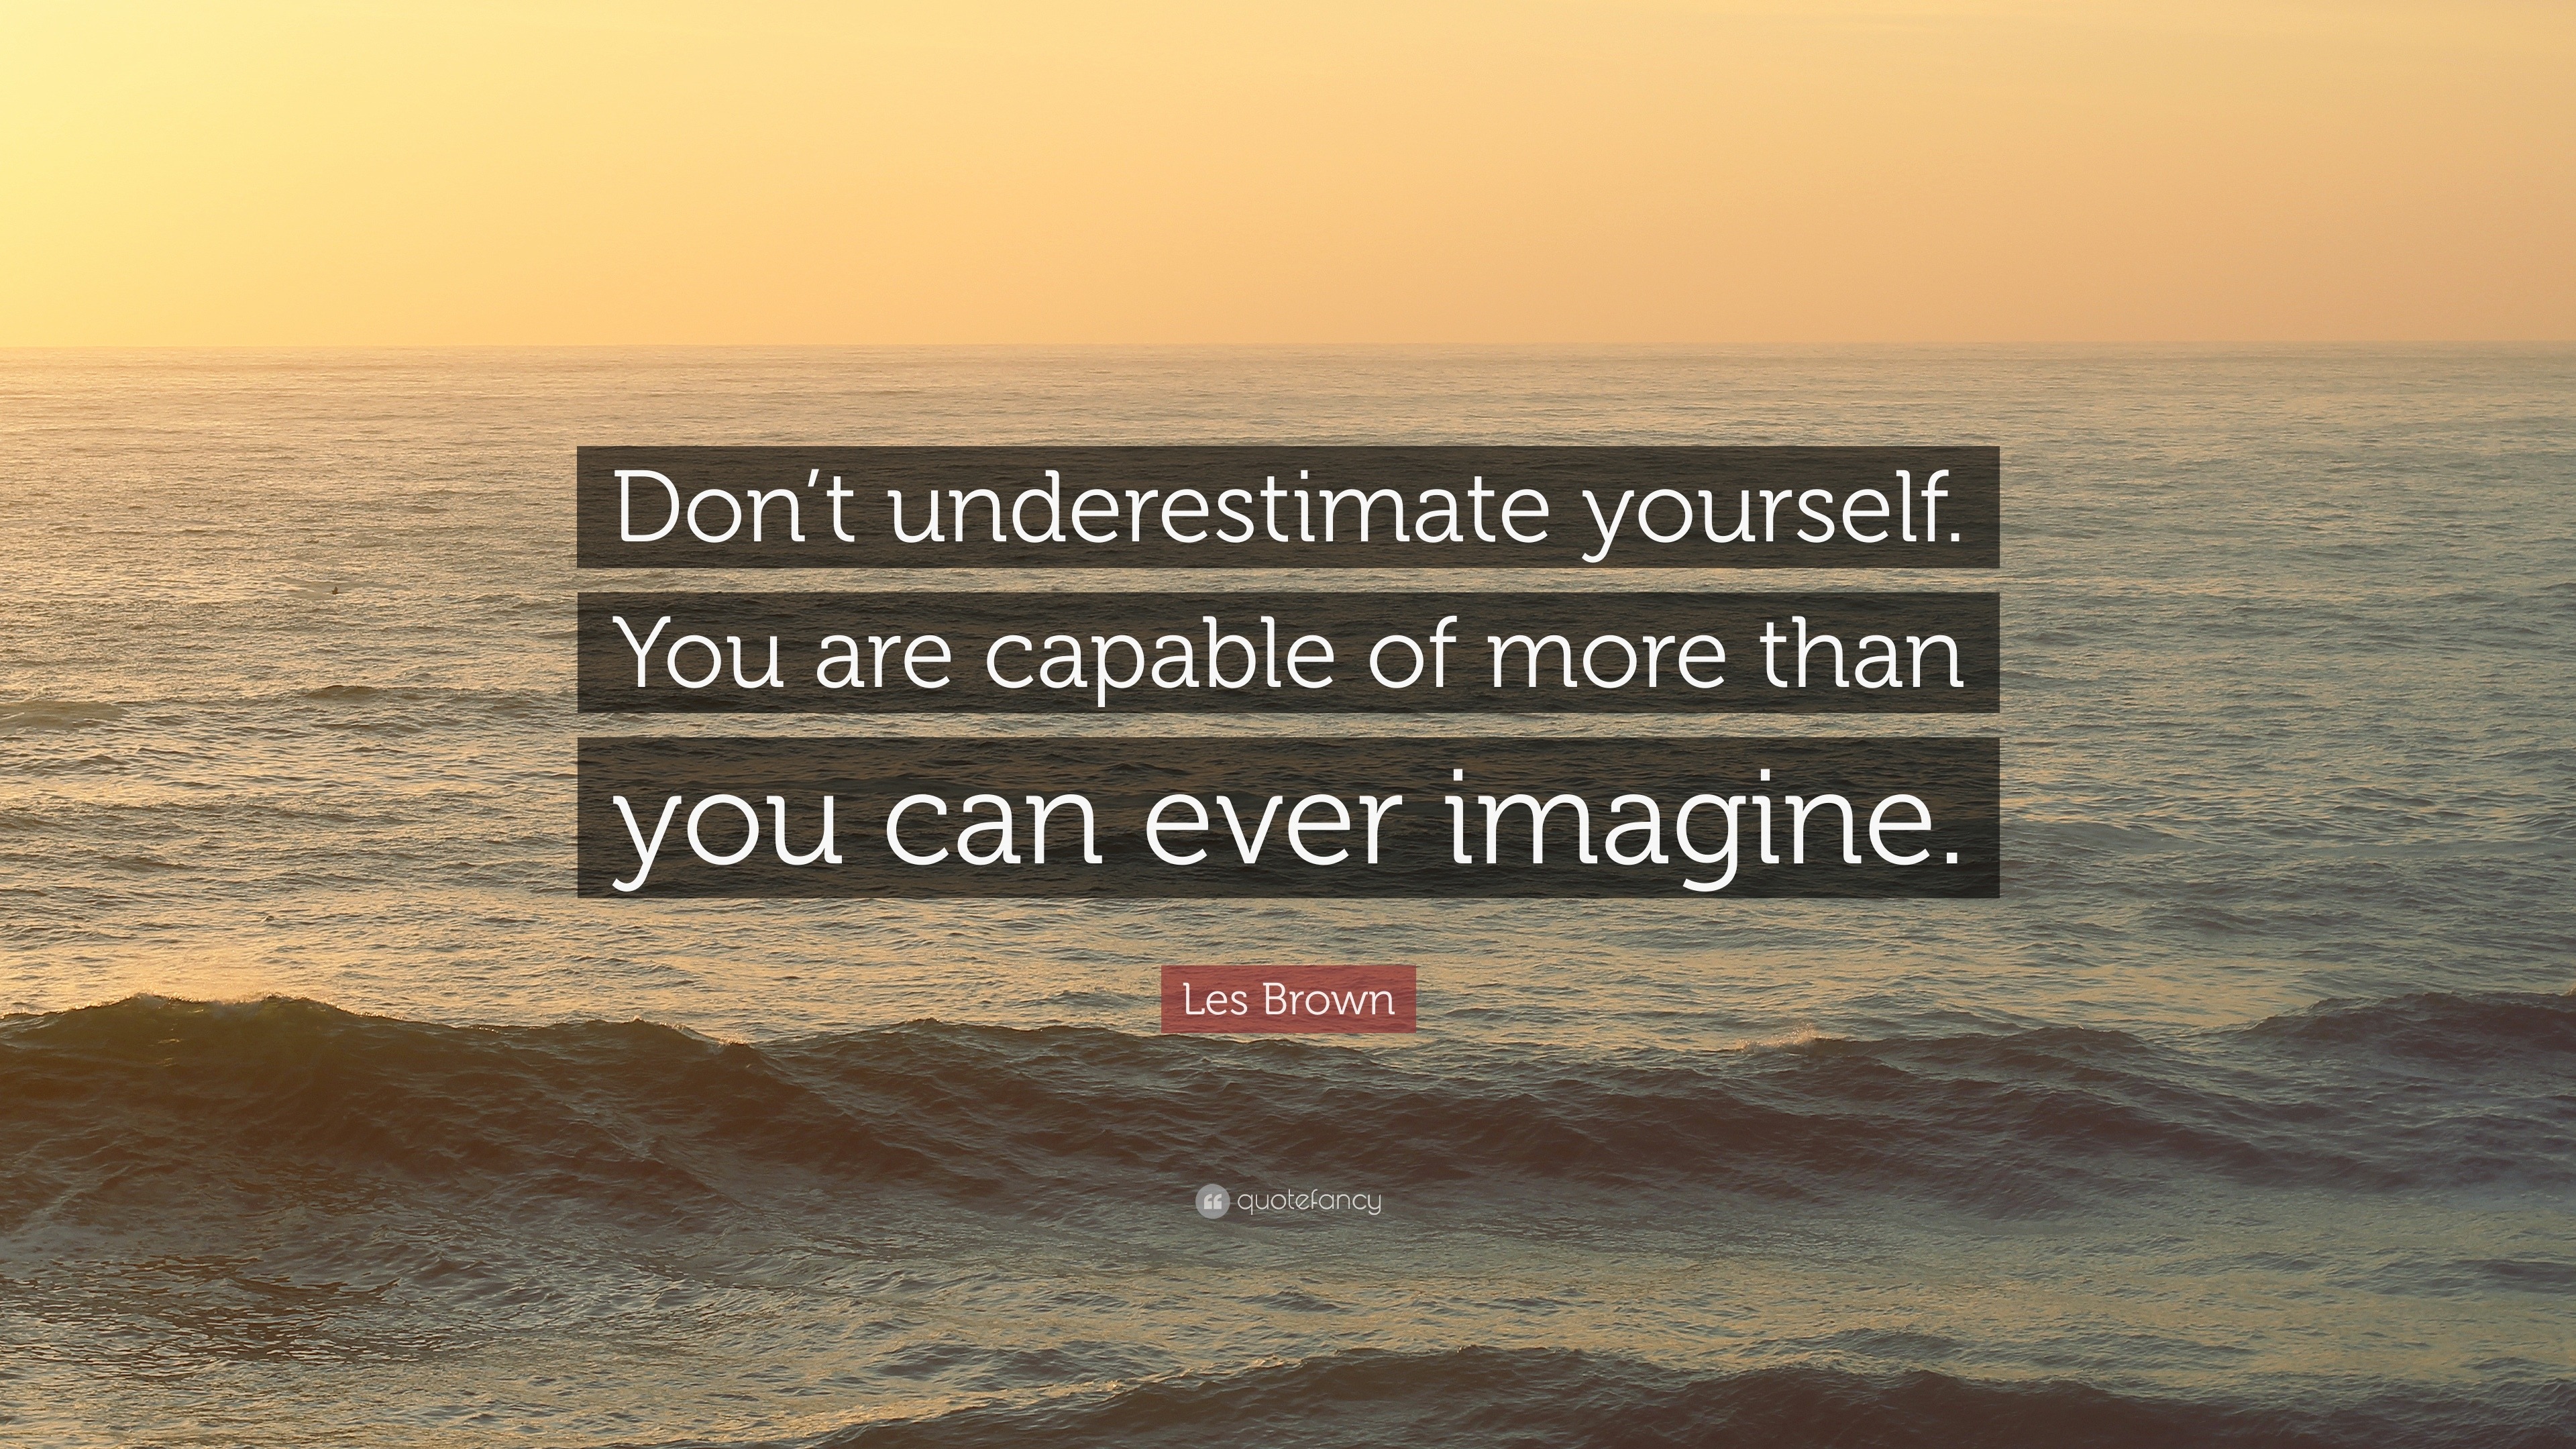 Les Brown Quote: "Don't underestimate yourself. You are capable of more than you can ever ...